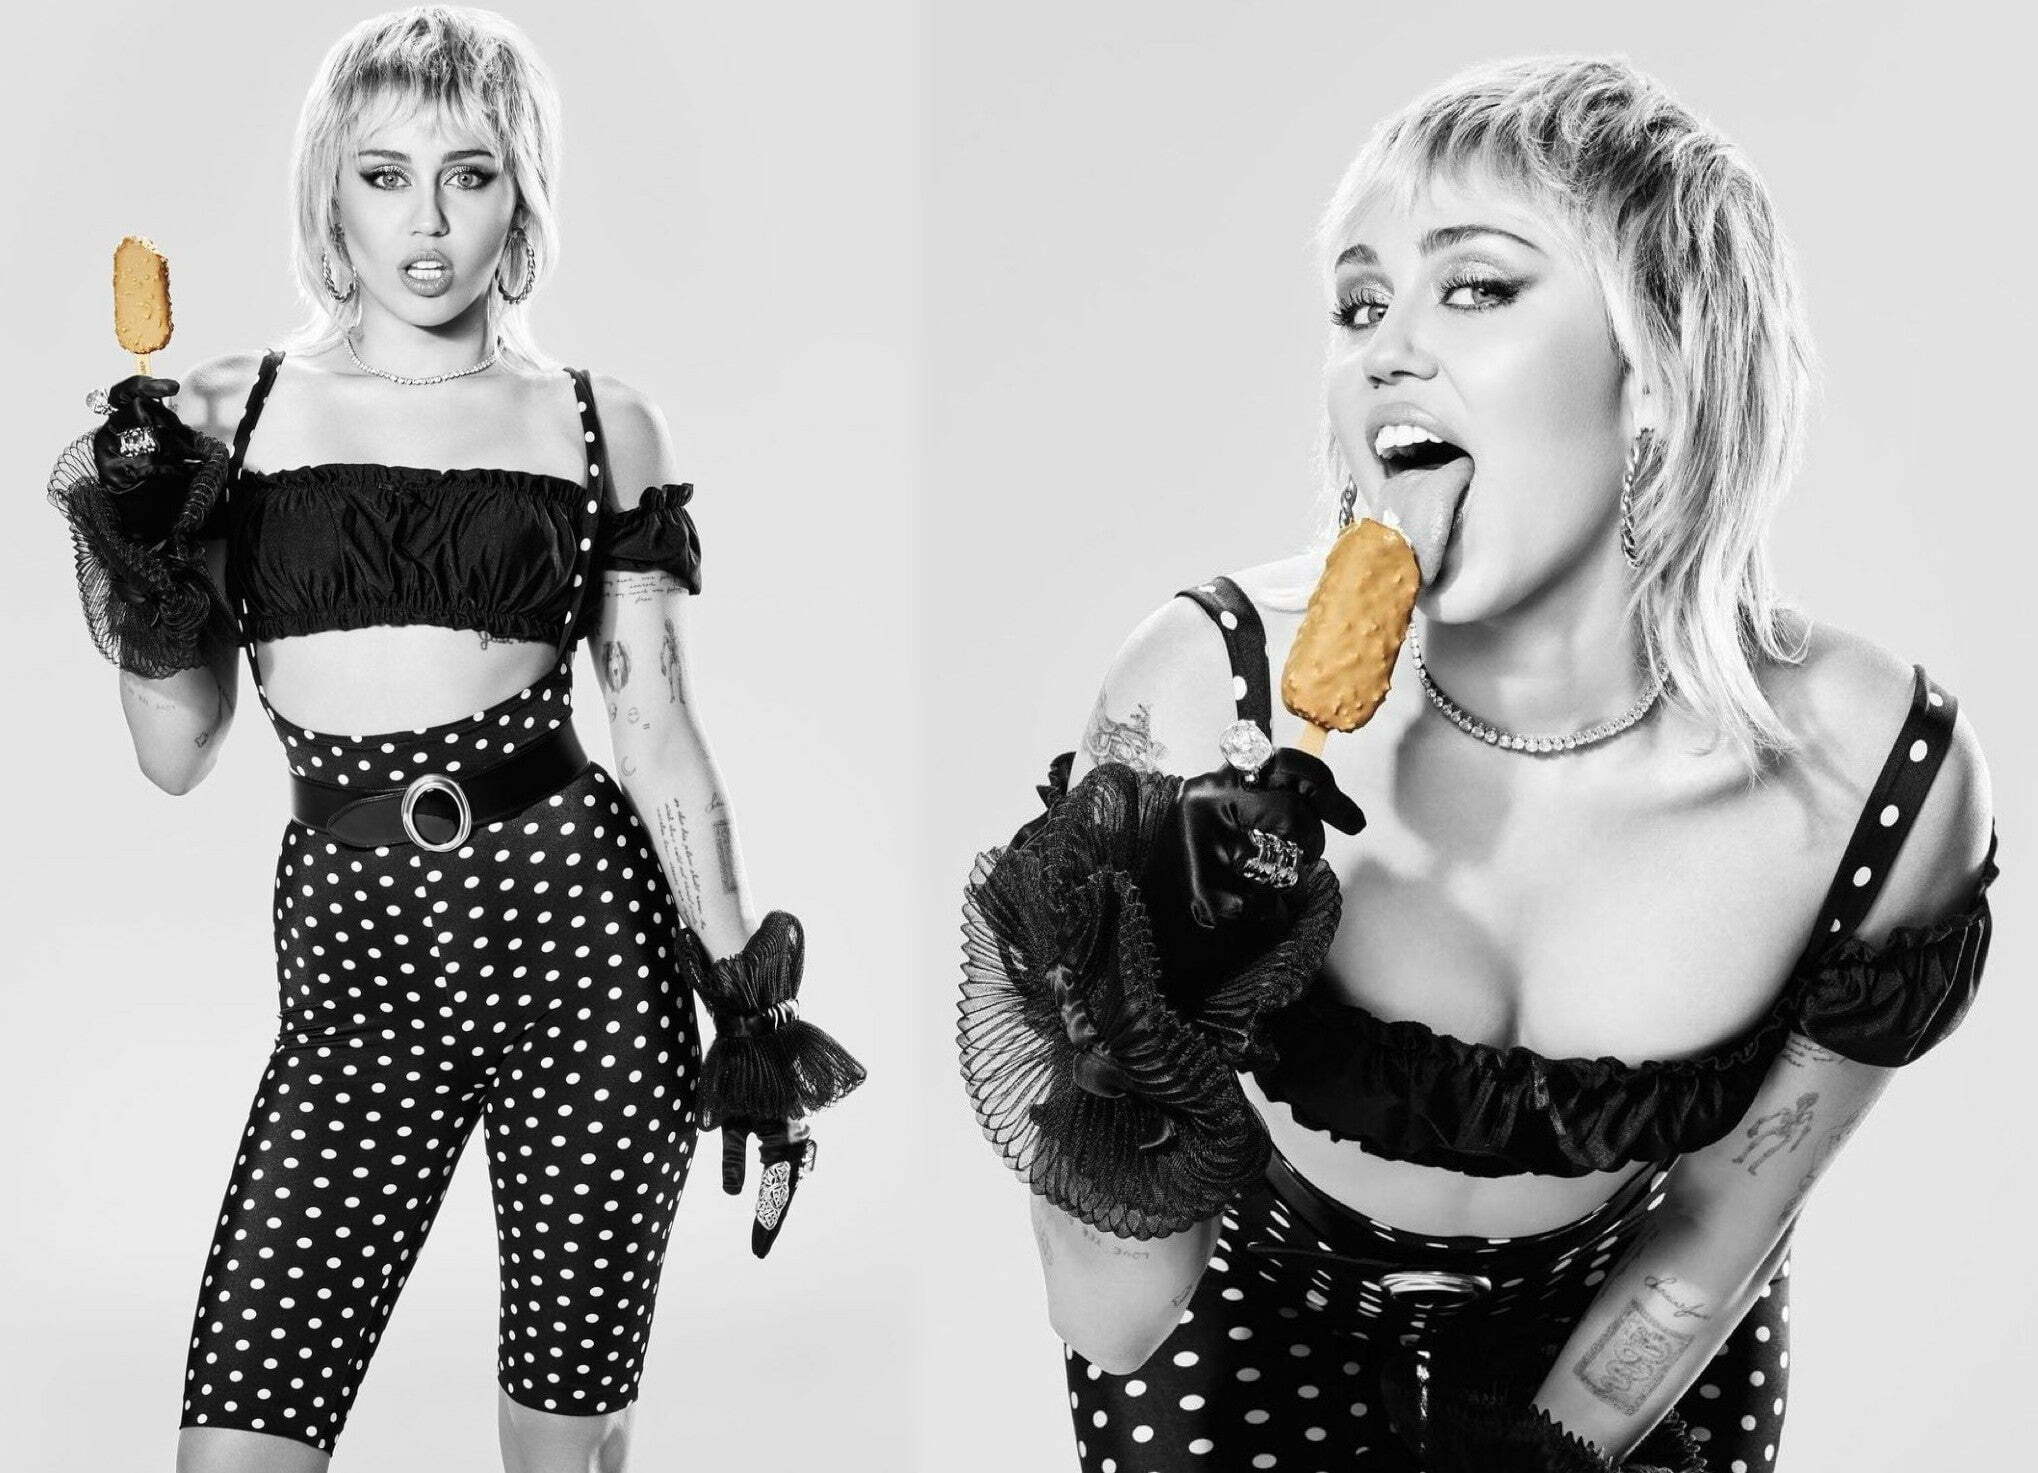 Miley Cyrus couldn't make an icecream ad without creating soft-core porn